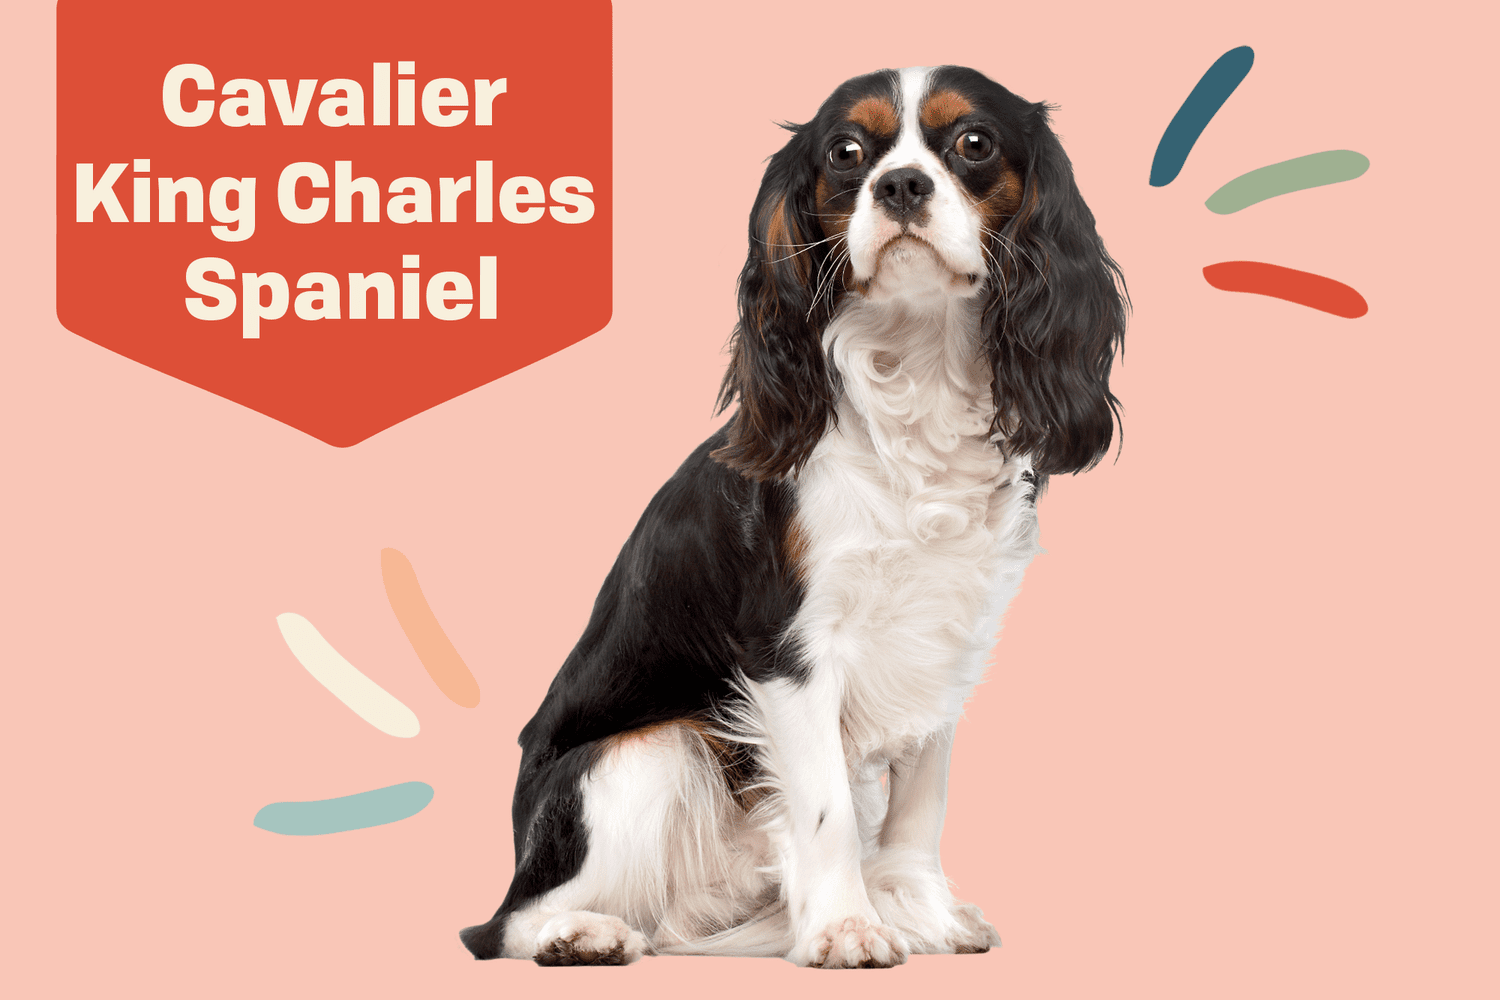 what should i feed my cavalier king charles puppy